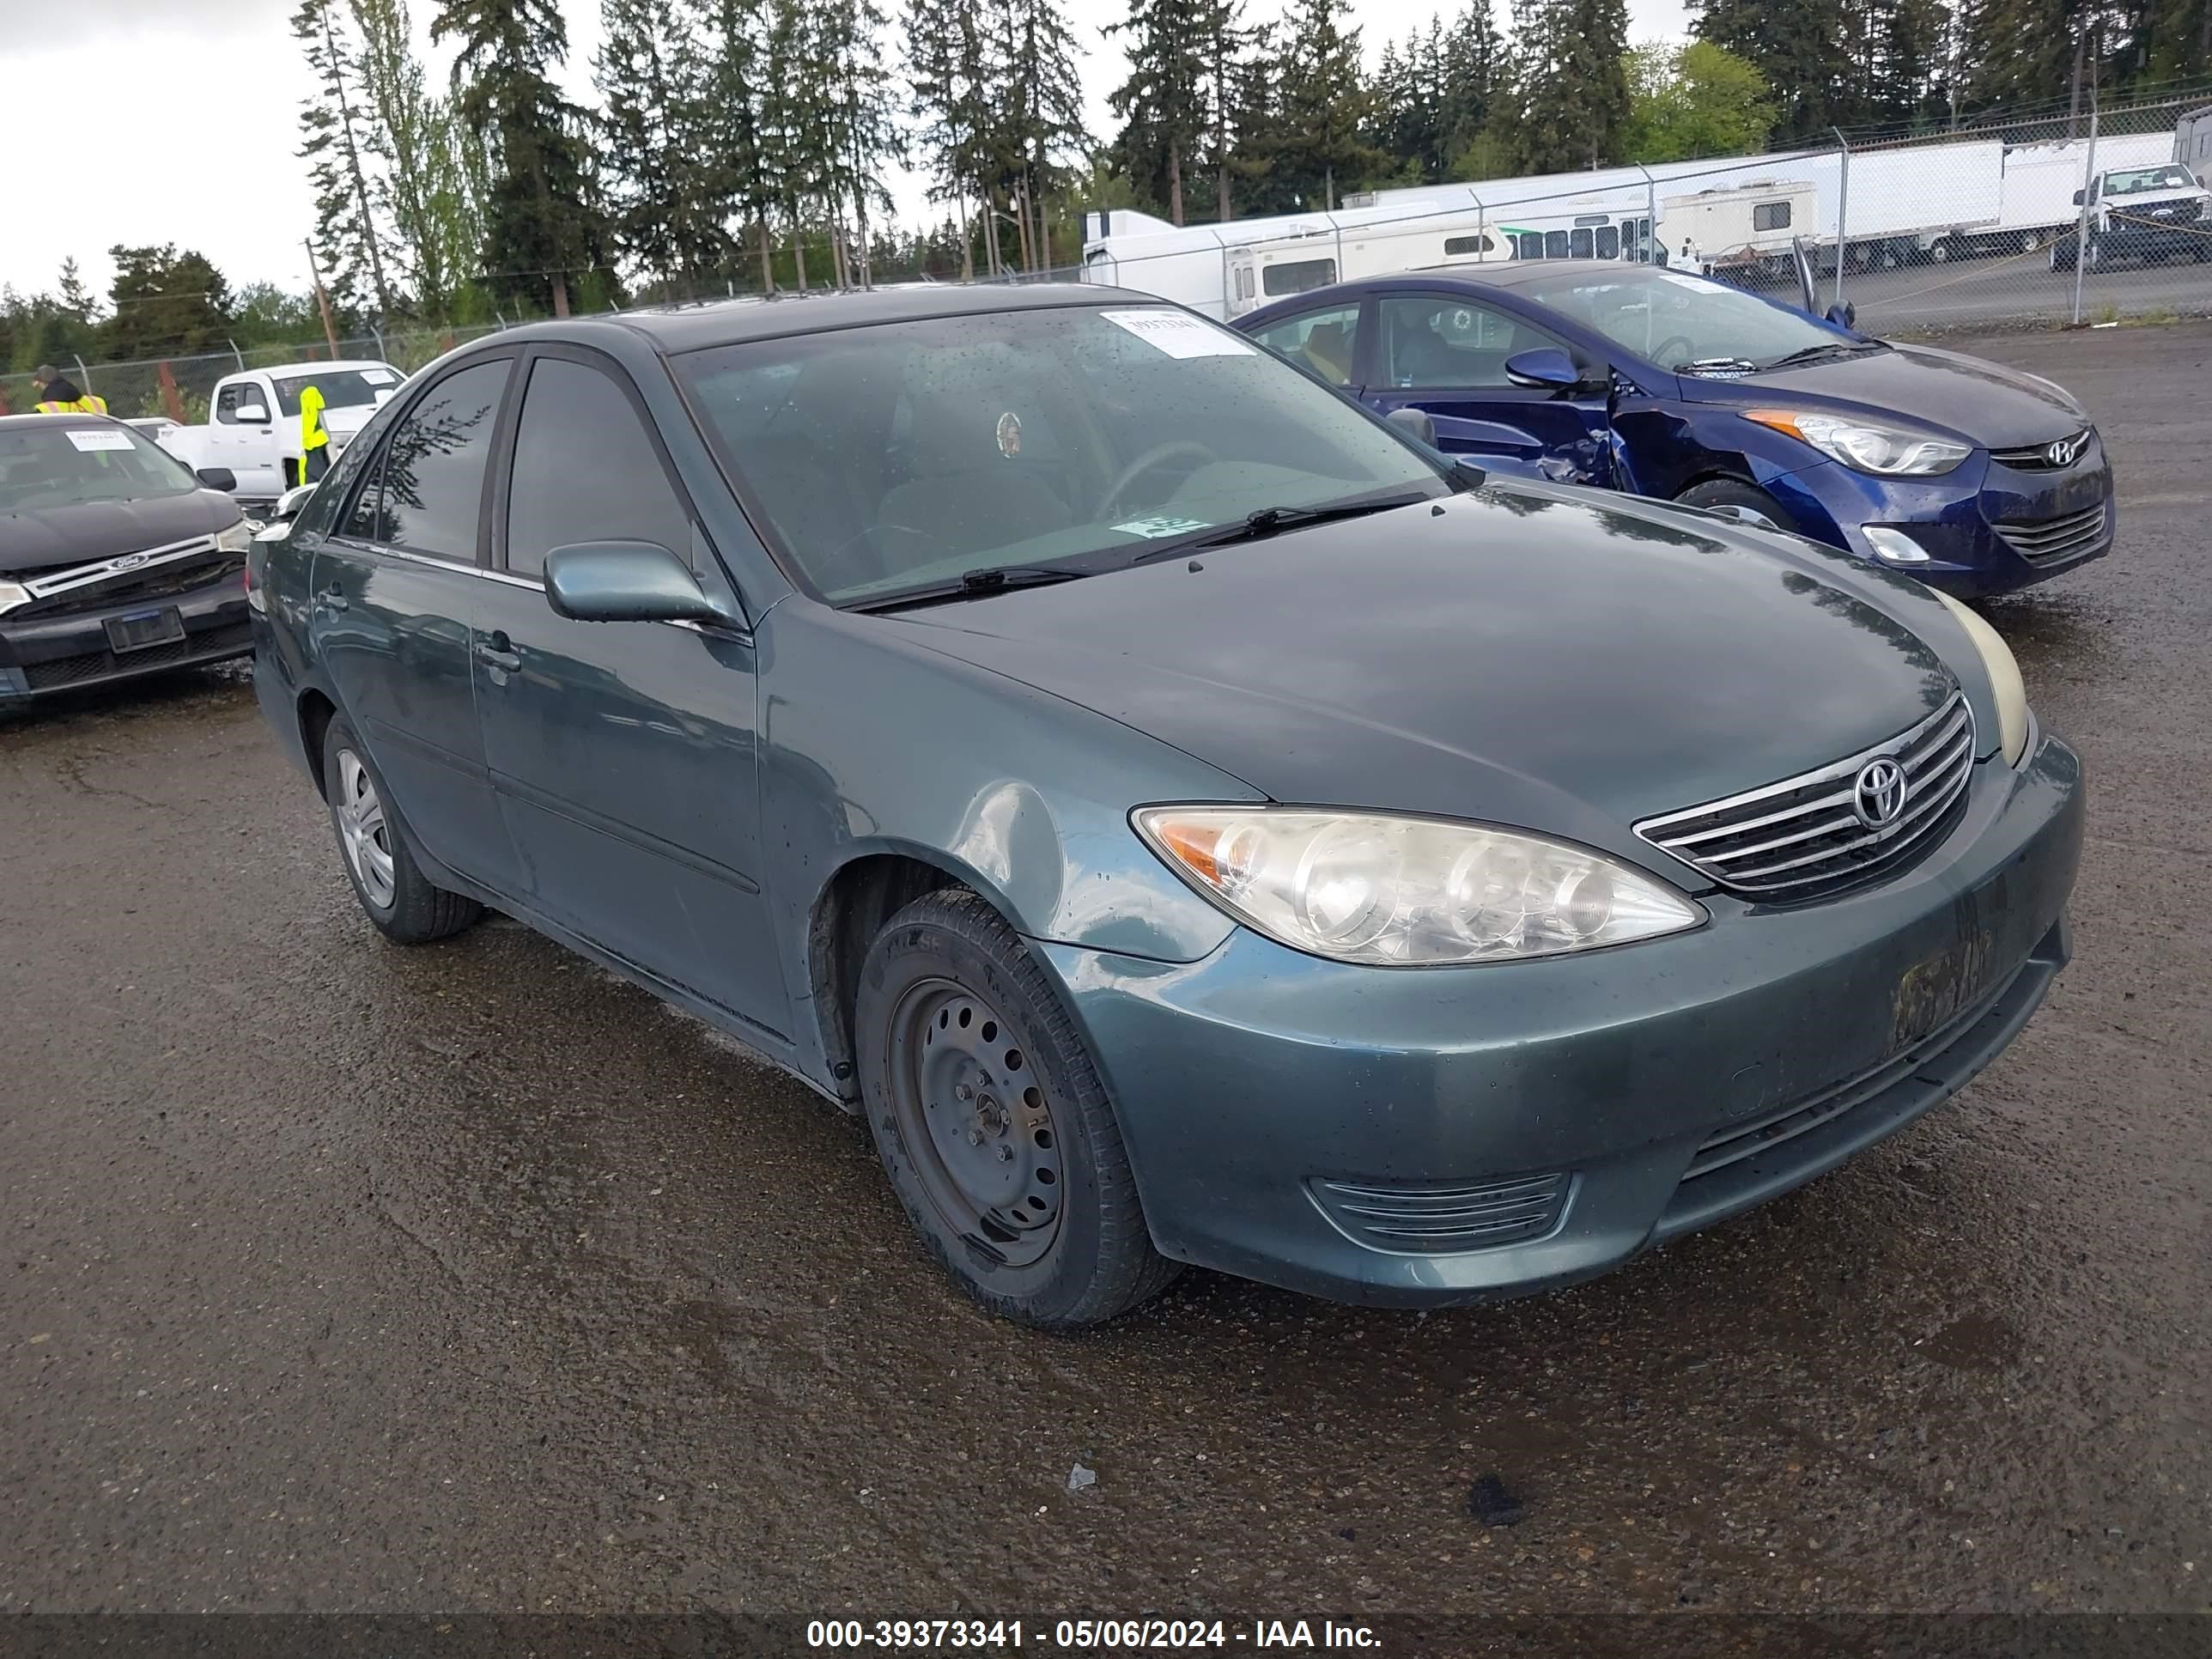 JTDBE30K153035648 2005 Toyota Camry Le